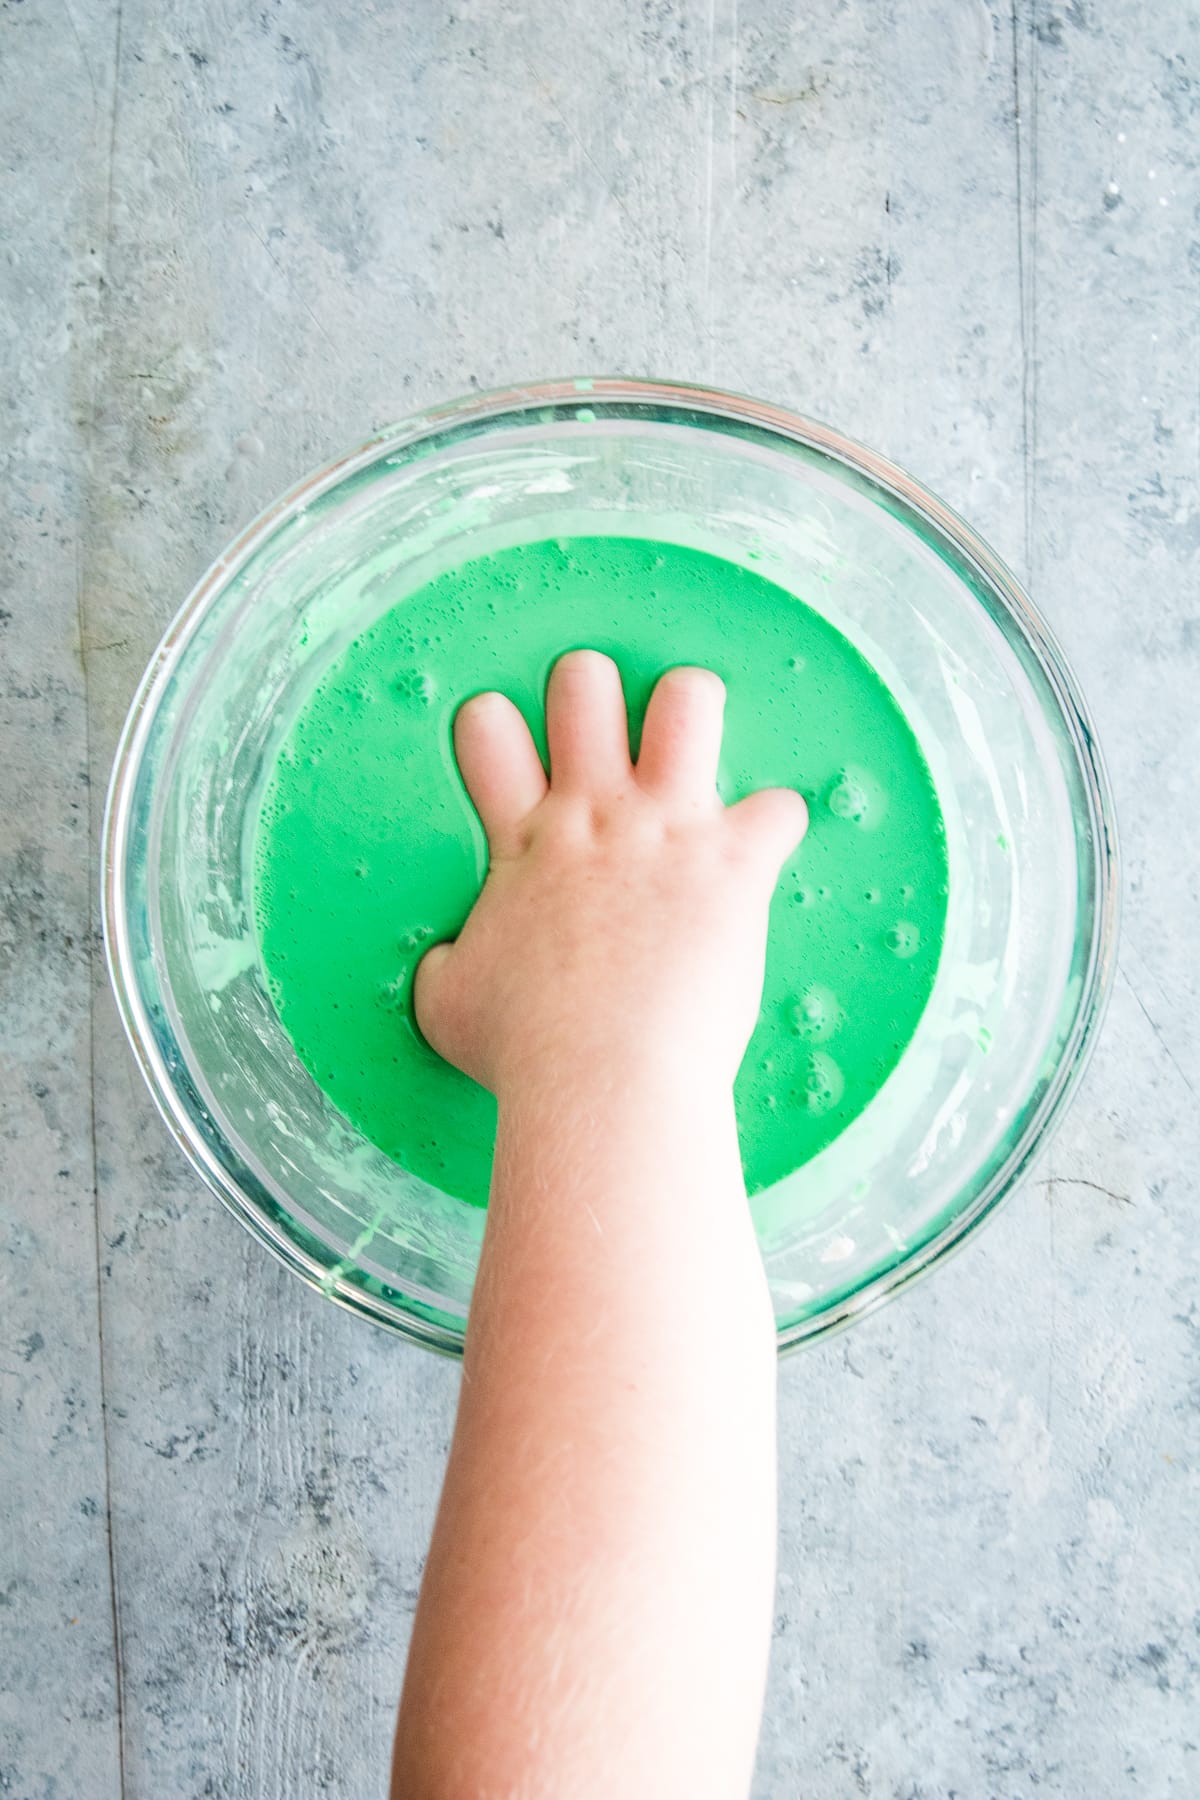 Hand in green oobleck